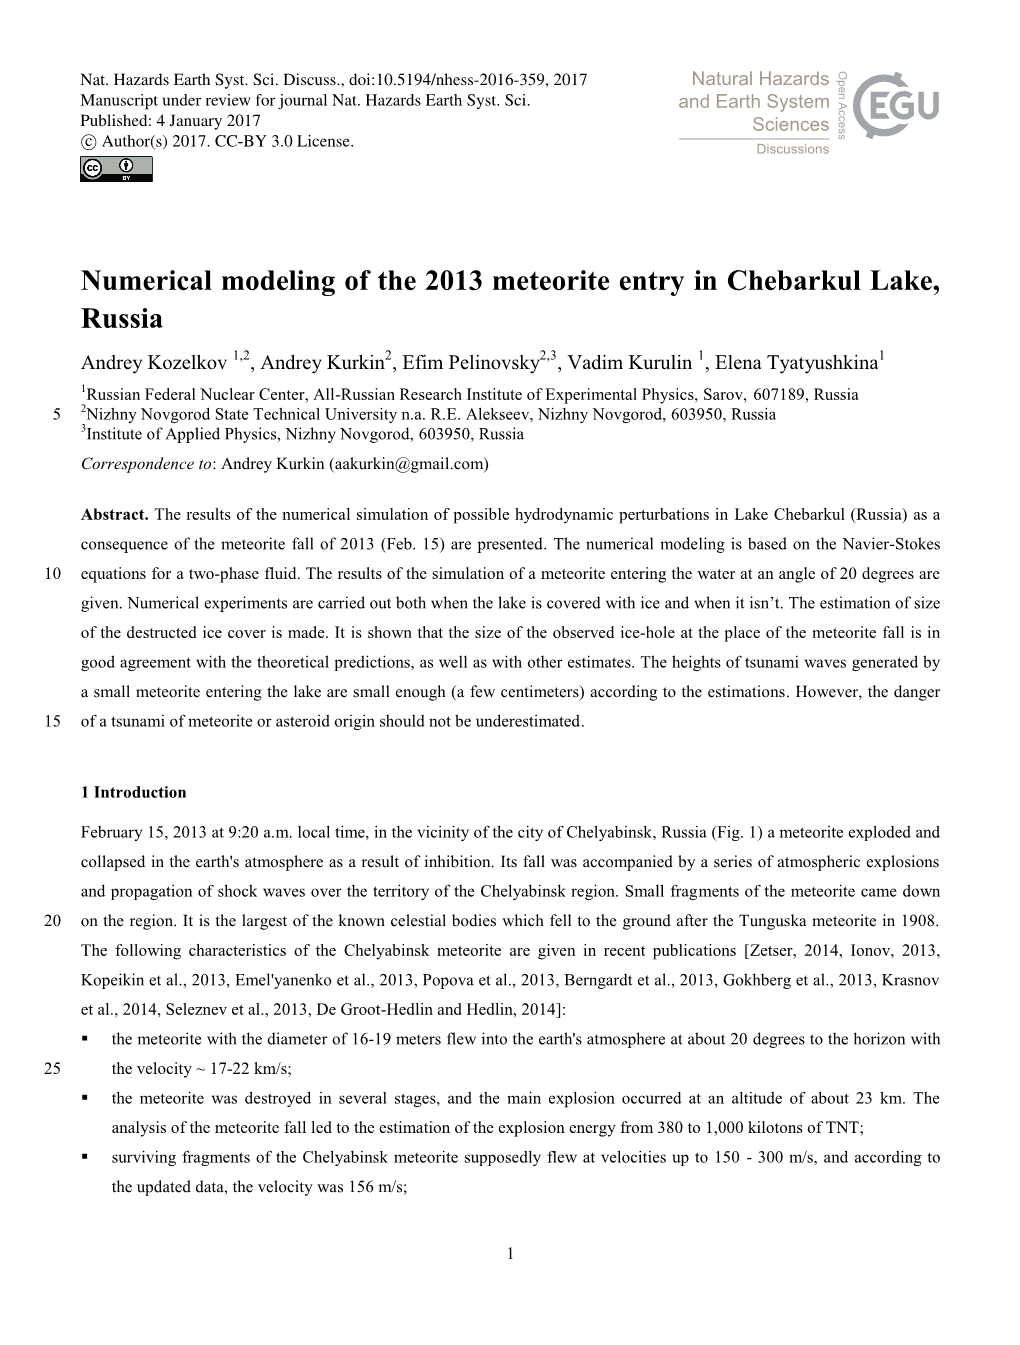 Numerical Modeling of the 2013 Meteorite Entry in Chebarkul Lake